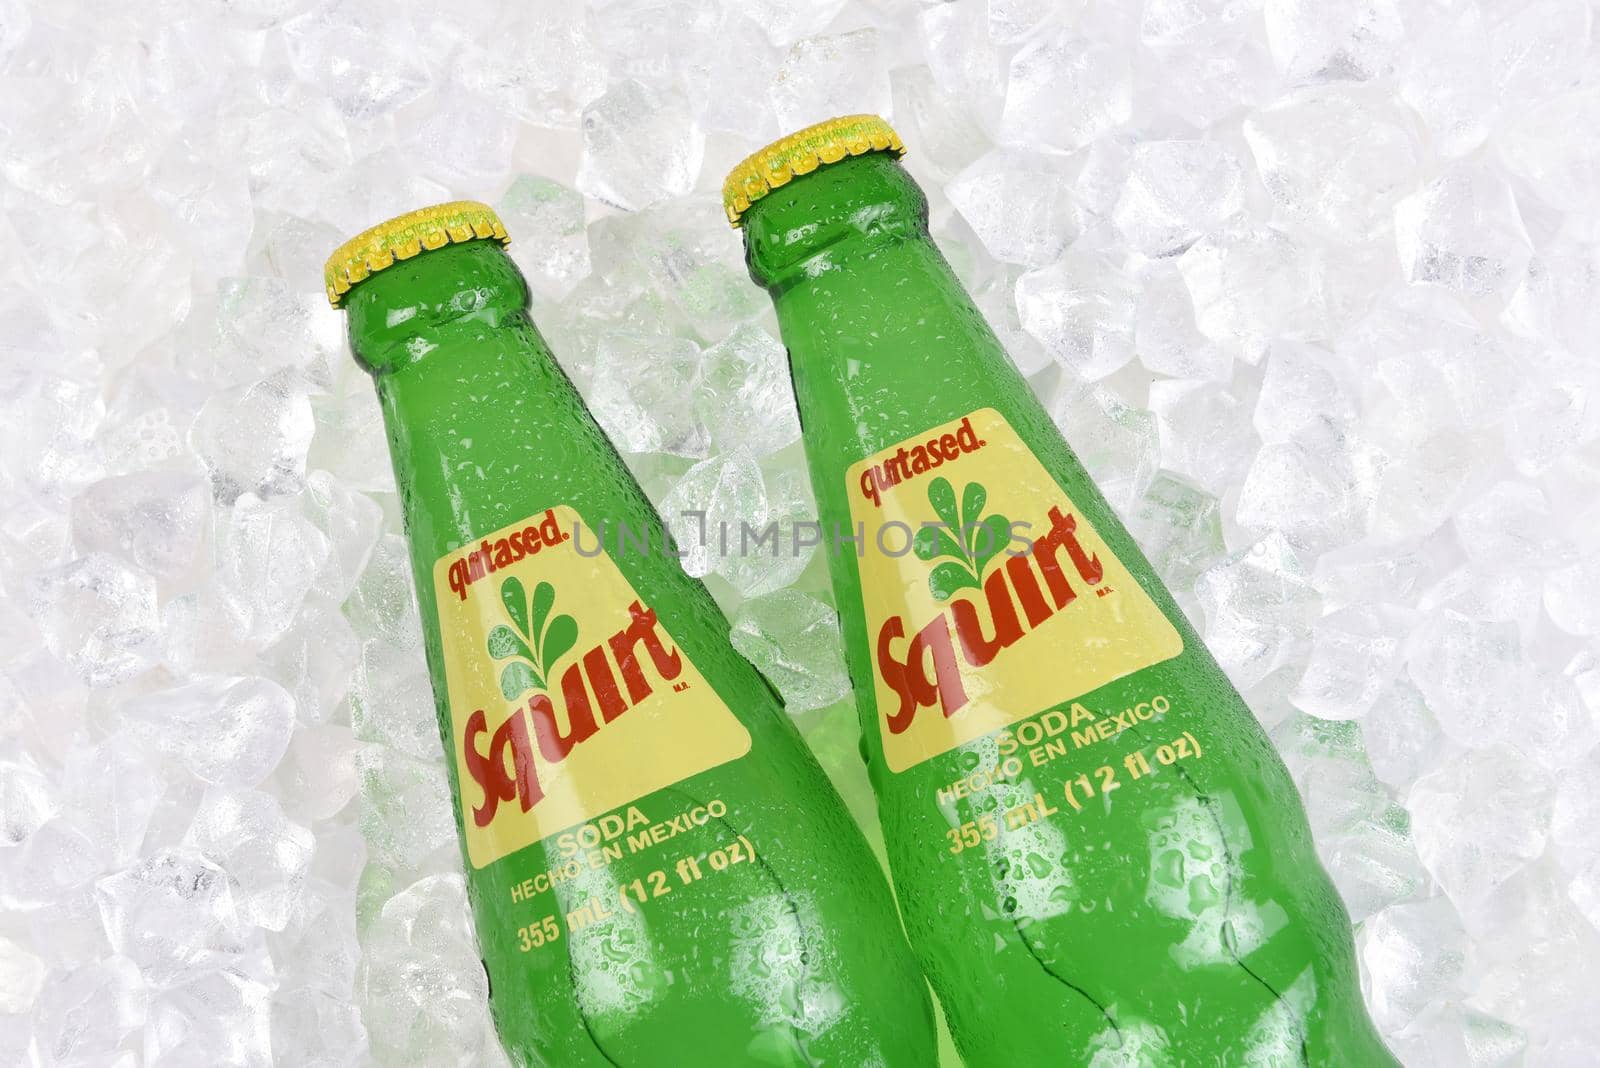 IRVINE, CALIFORNIA - 20 APRIL 2020: Closeup of two Bottles of Squirt Citrus Flavored Soft Drink in a bed of ice. Made in Mexico.